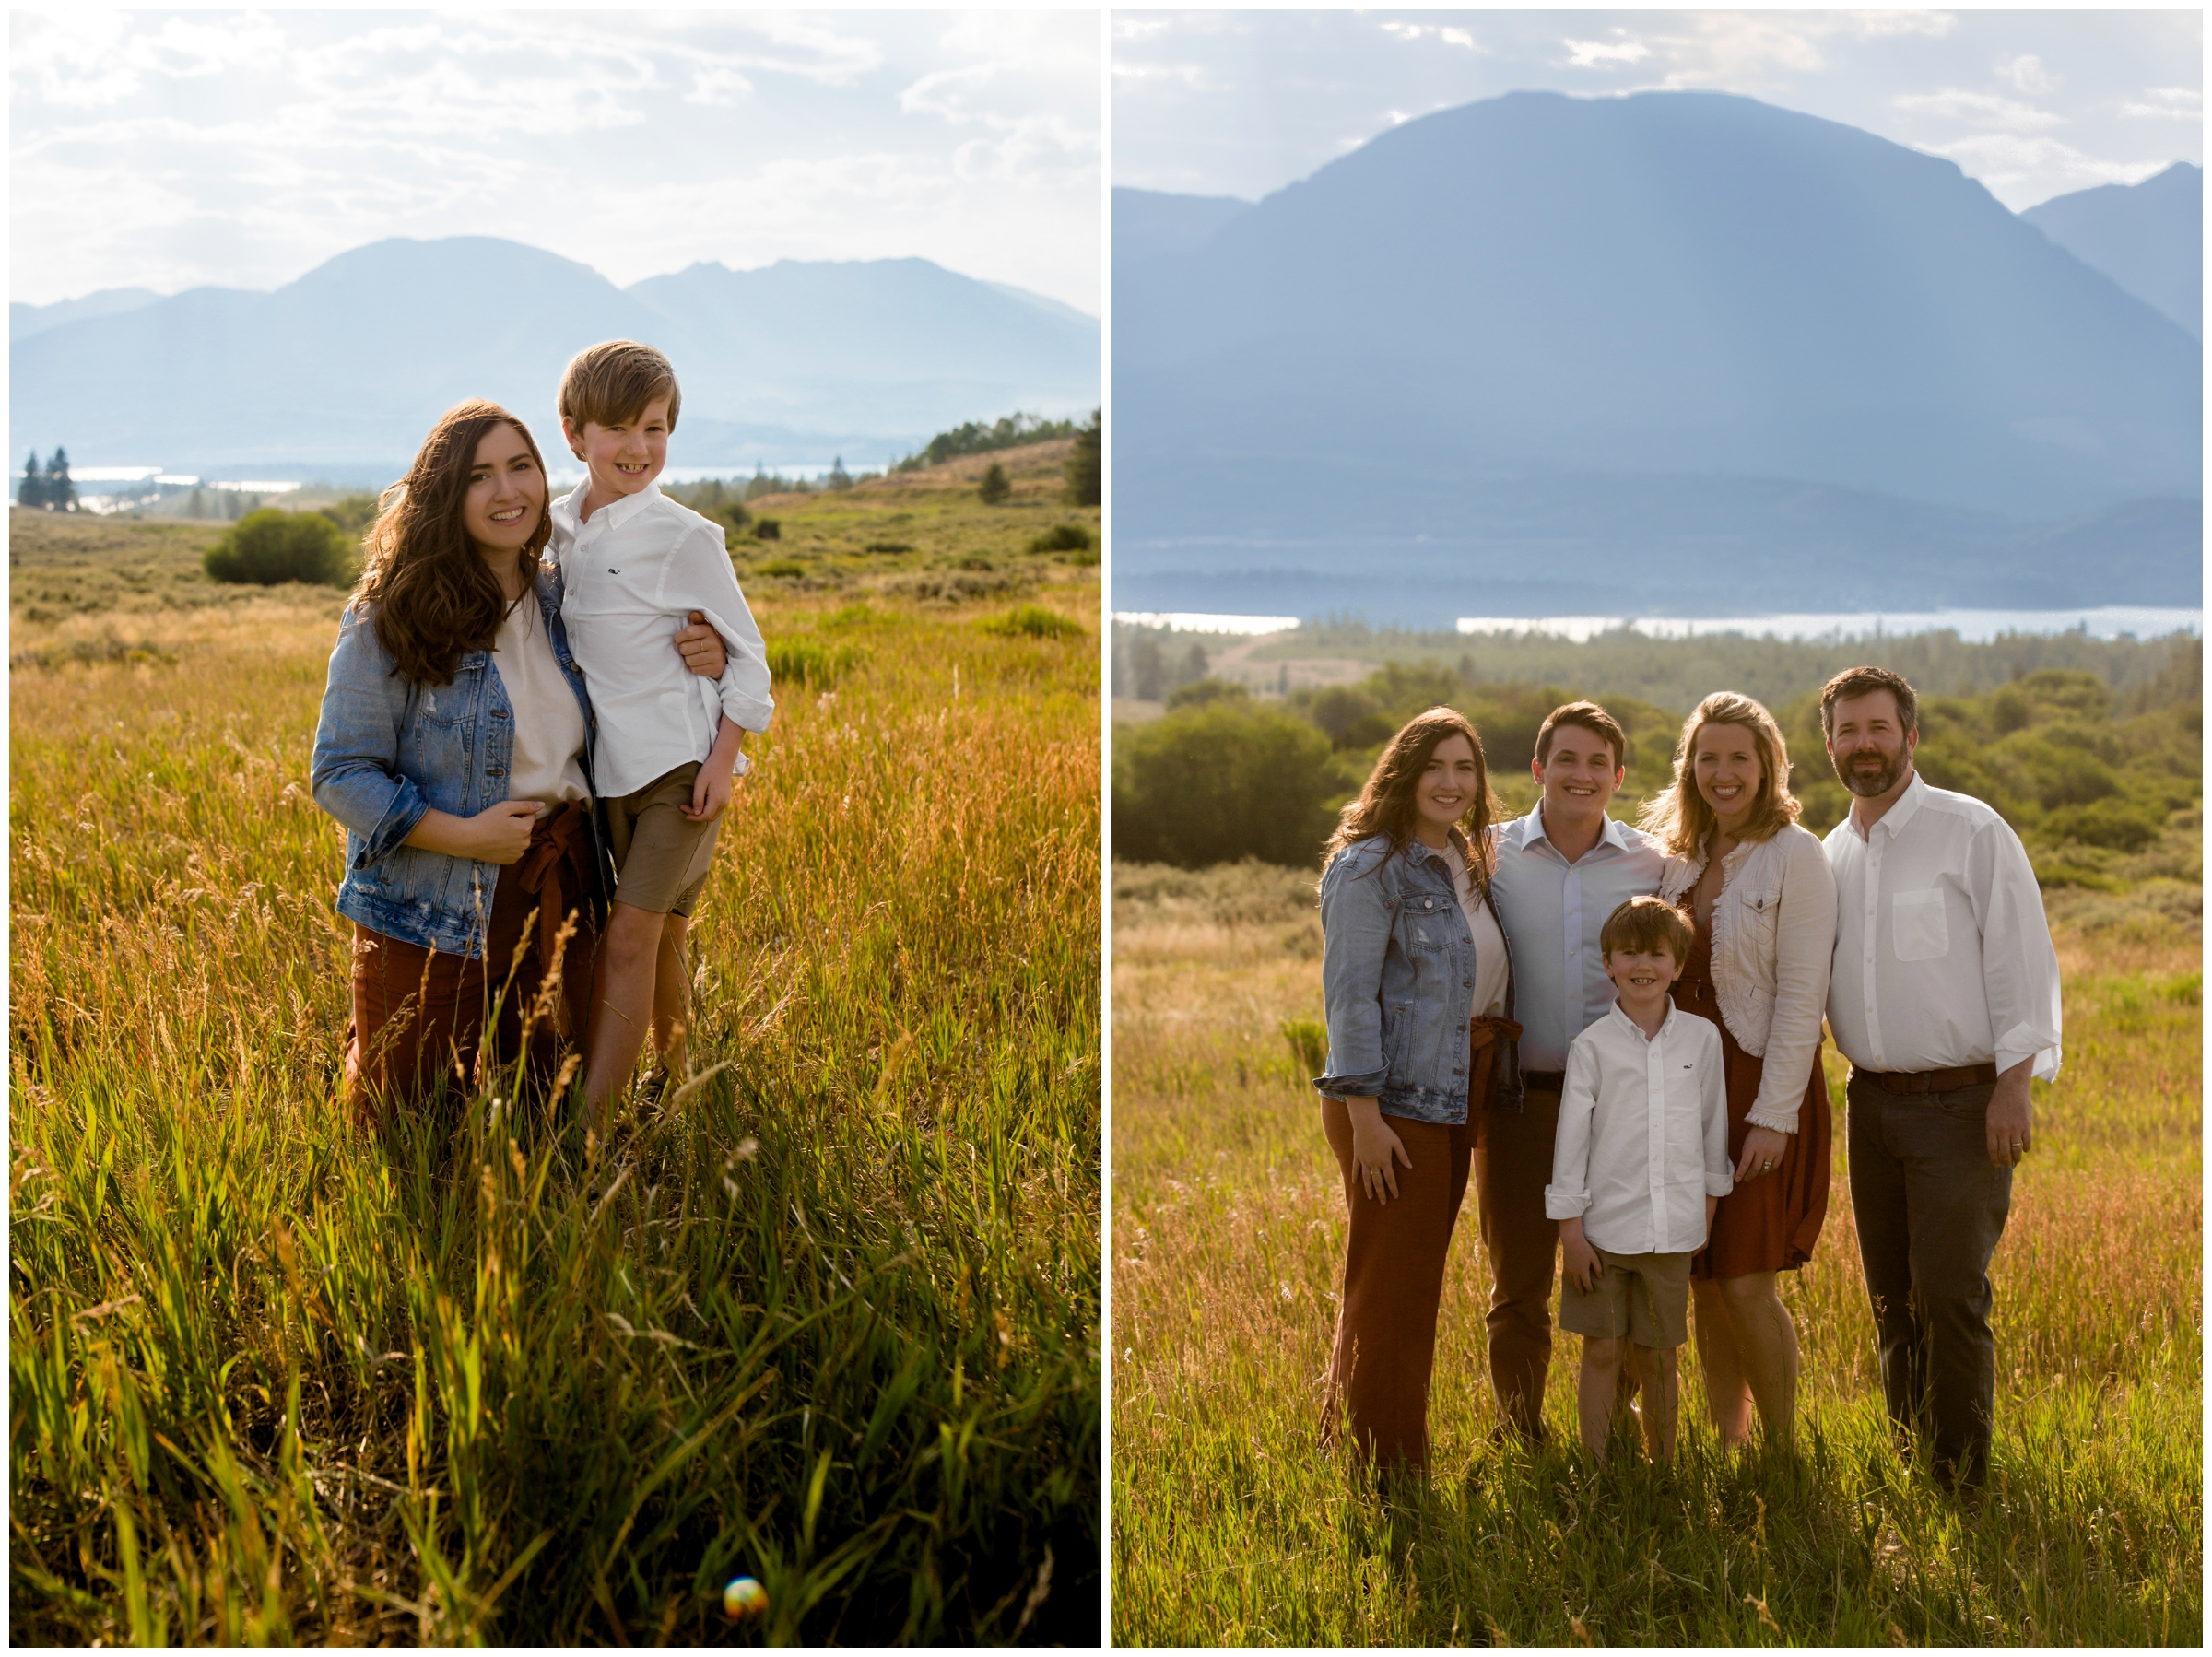 Breckenridge Colorado family portraits at Sapphire Point by award-winning photographer Plum Pretty Photography. Summit County family pictures.